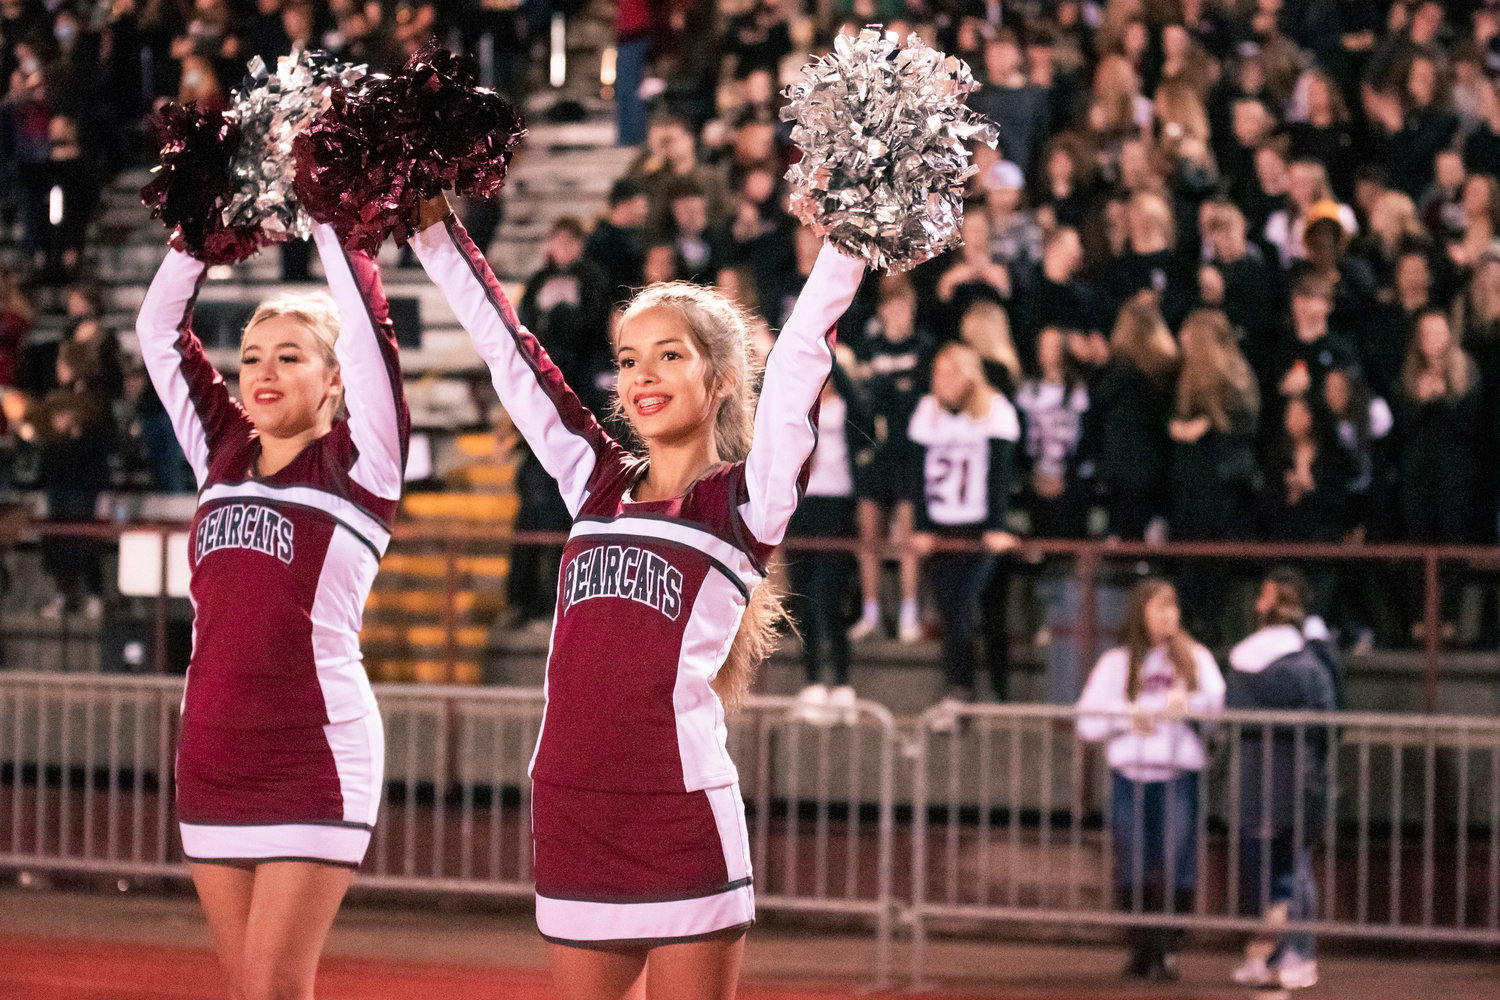 Cheerleaders raise their pom-poms during a game Friday night in Chehalis.